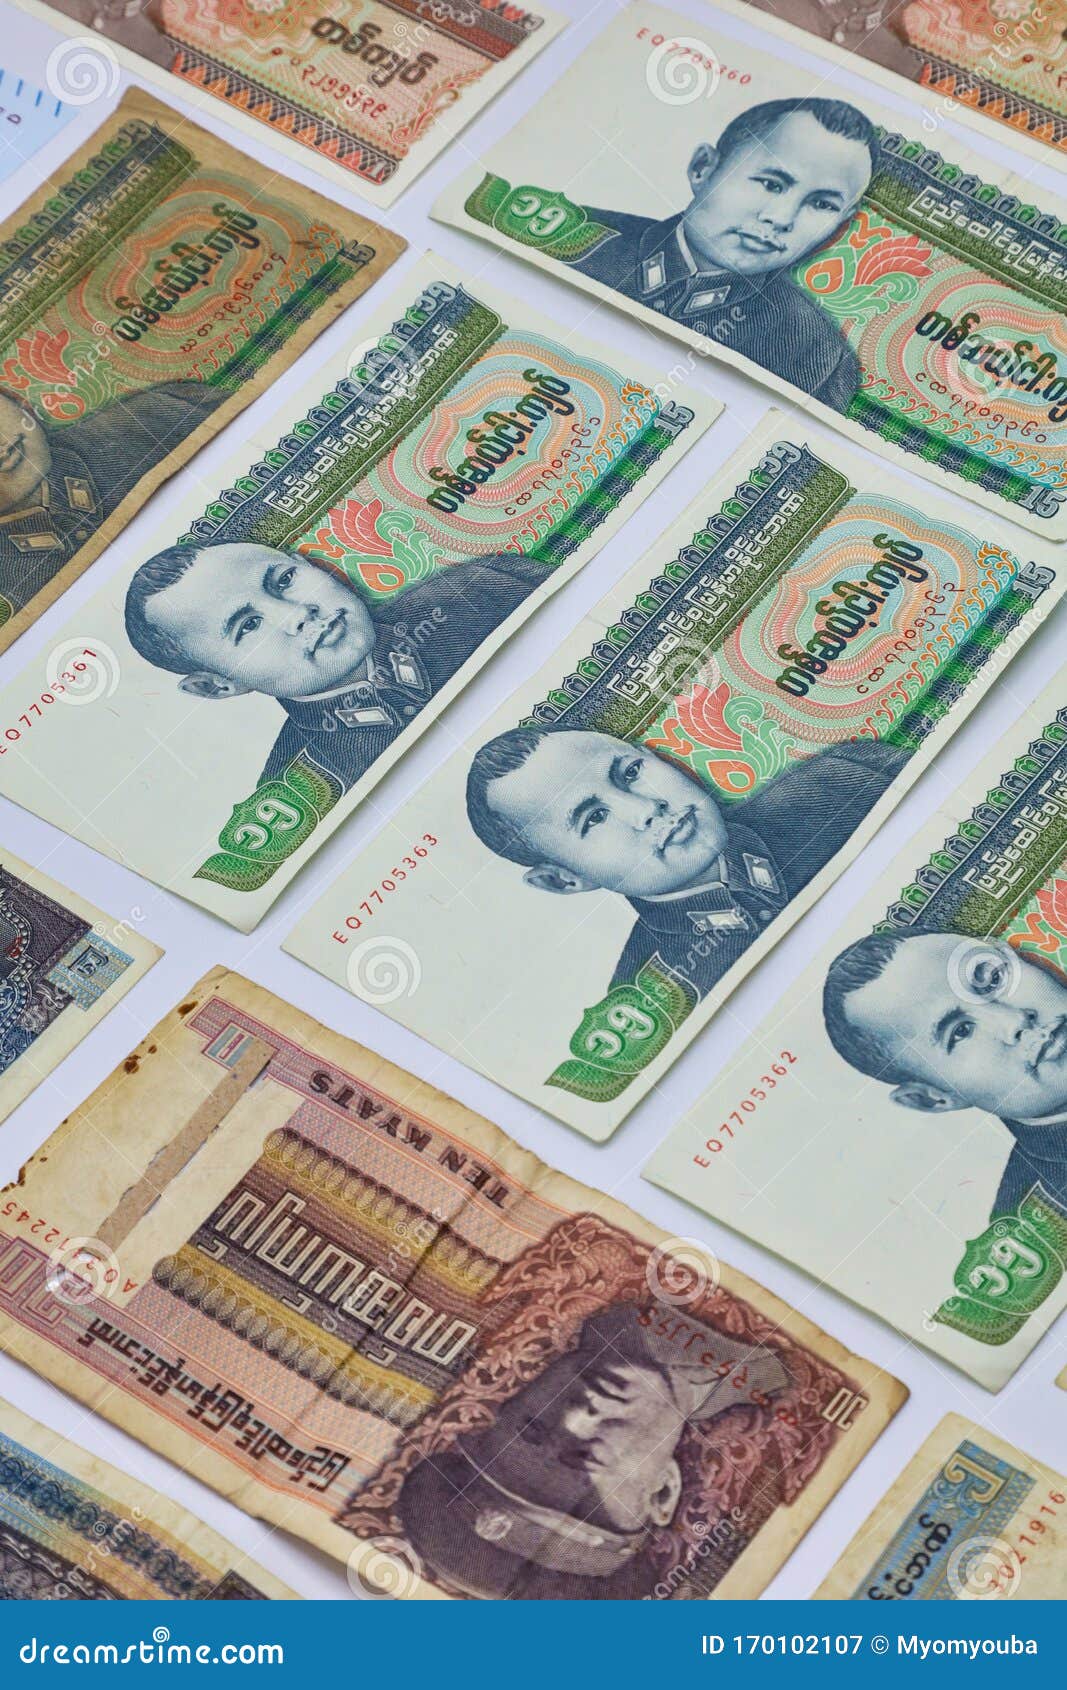 currency official kyat Which asian country is the